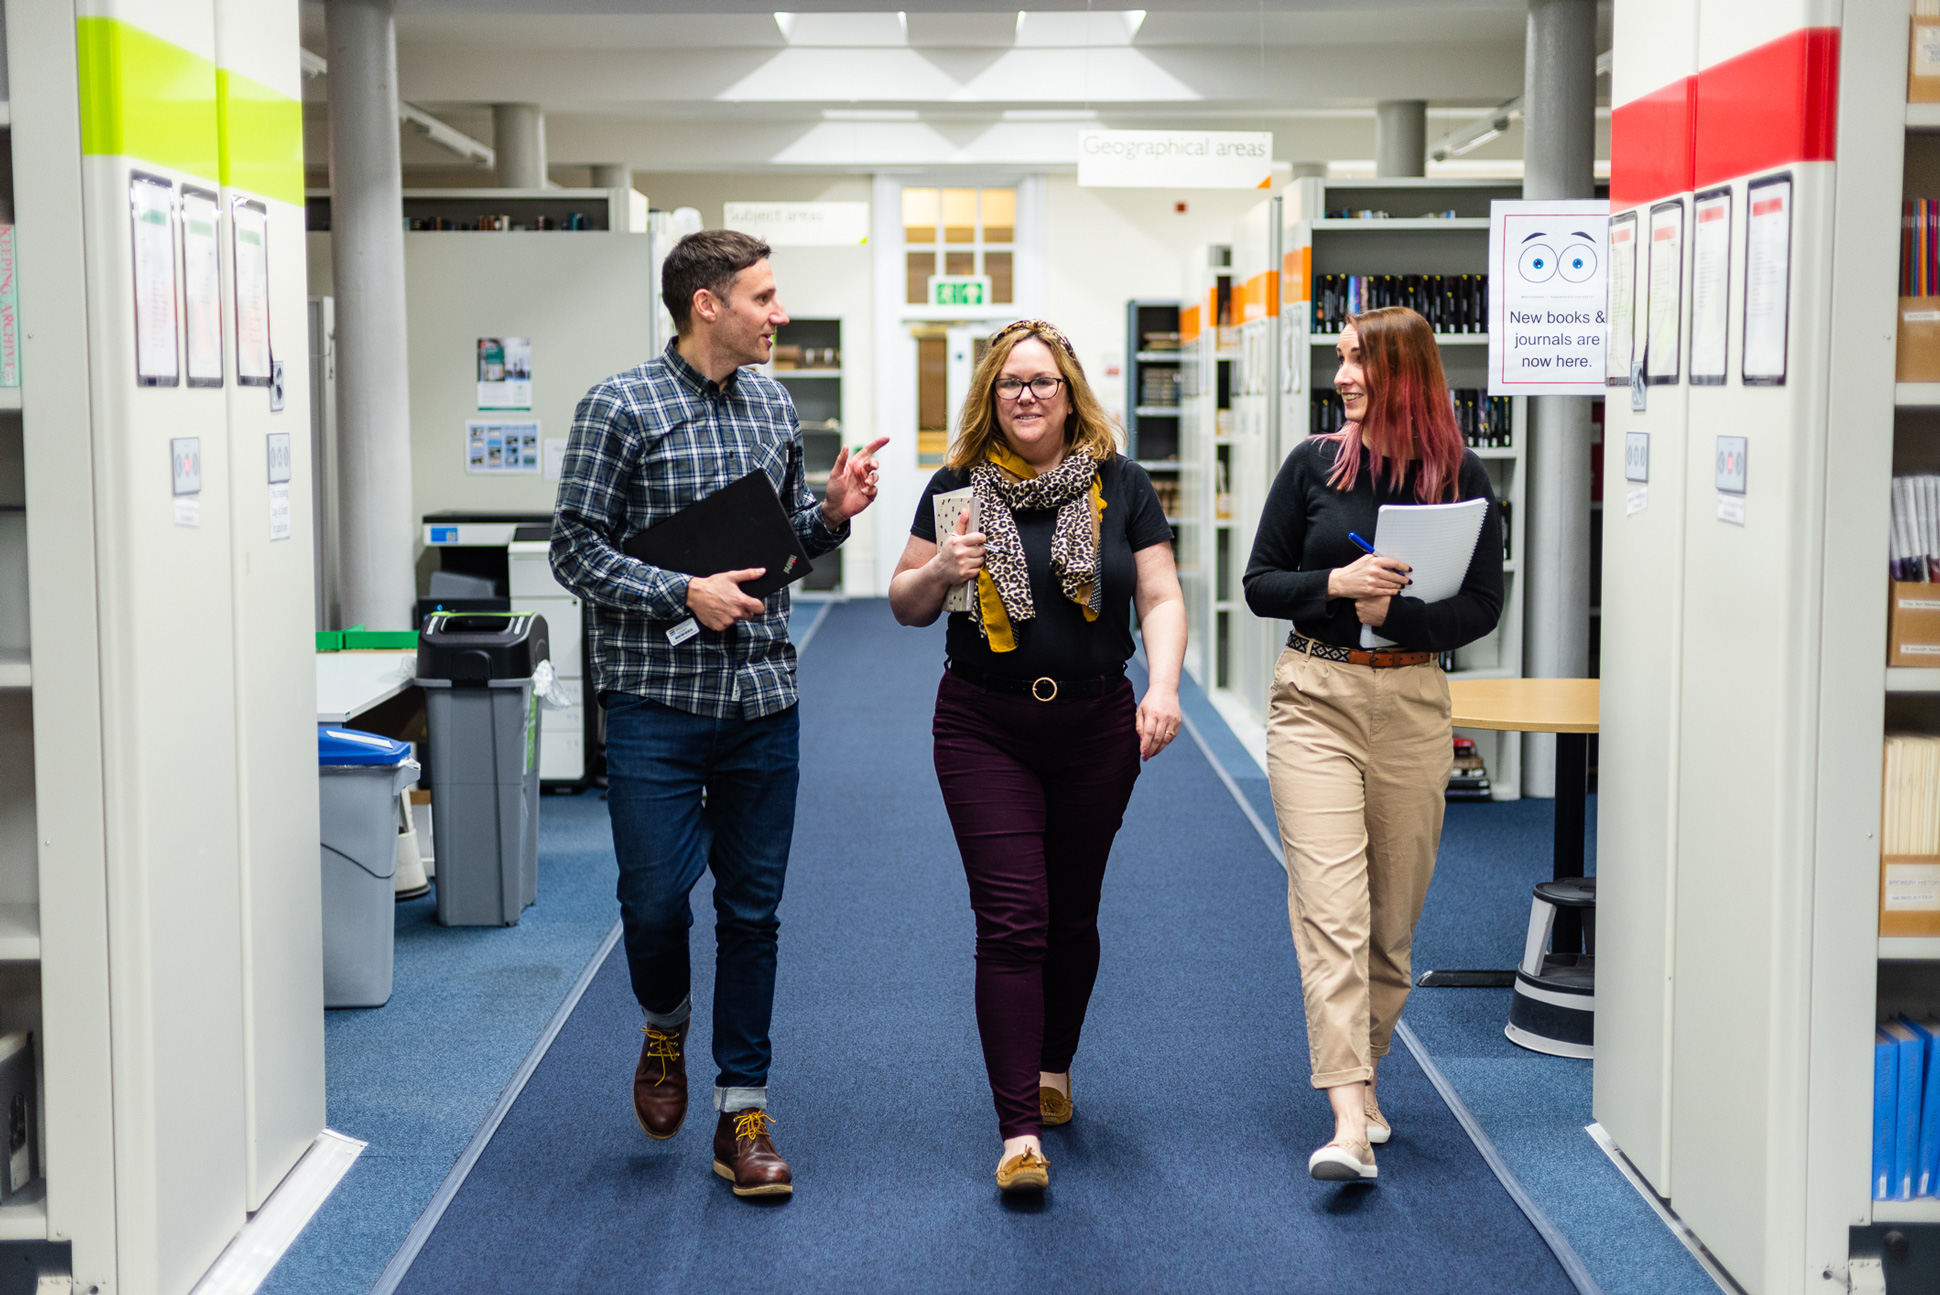 Three people walking along an aisle lined by library shelving.